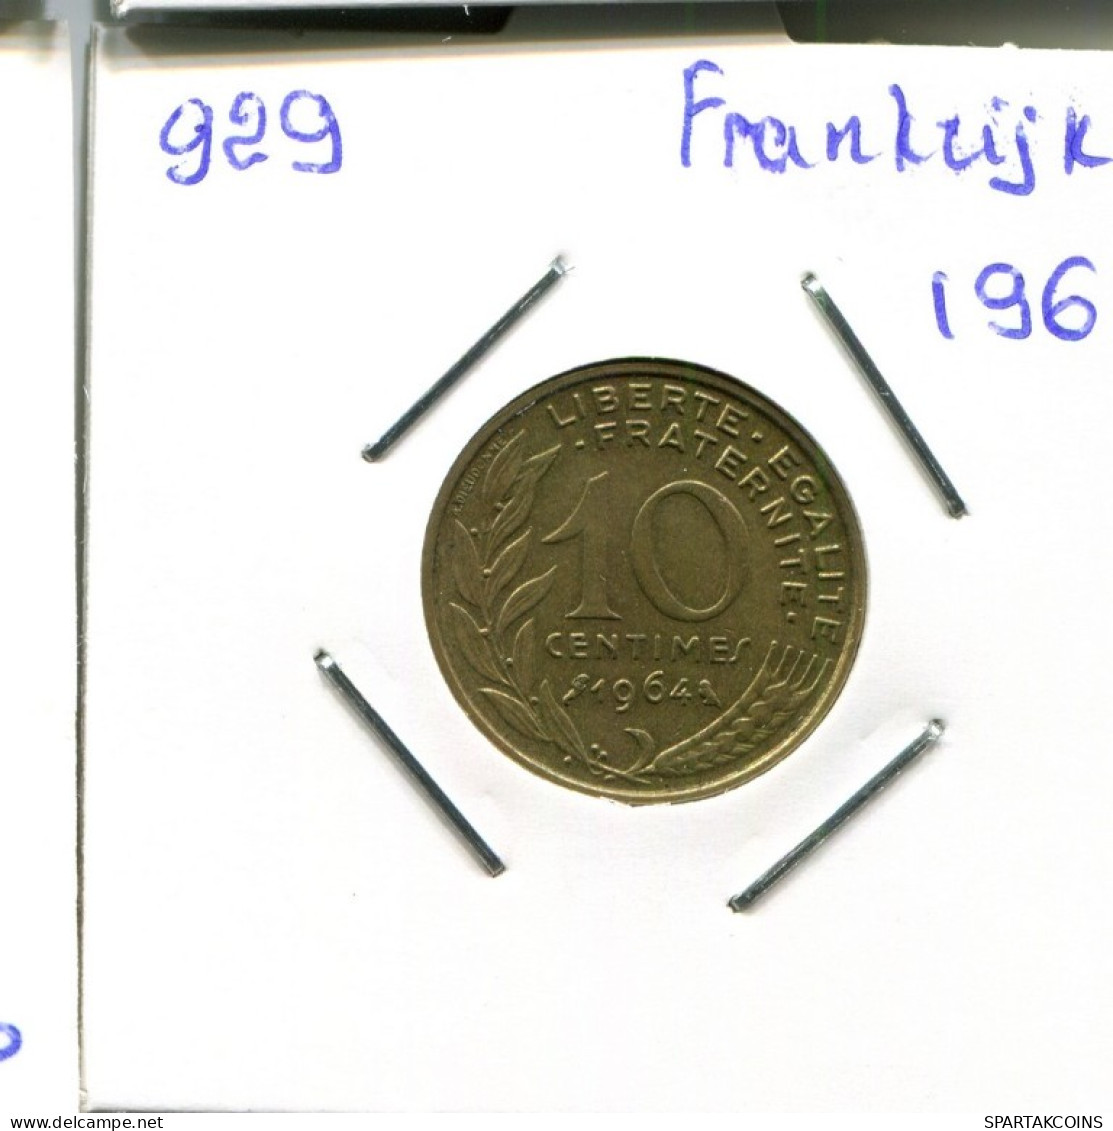 10 CENTIMES 1964 FRANCE Coin French Coin #AN122.U.A - 10 Centimes